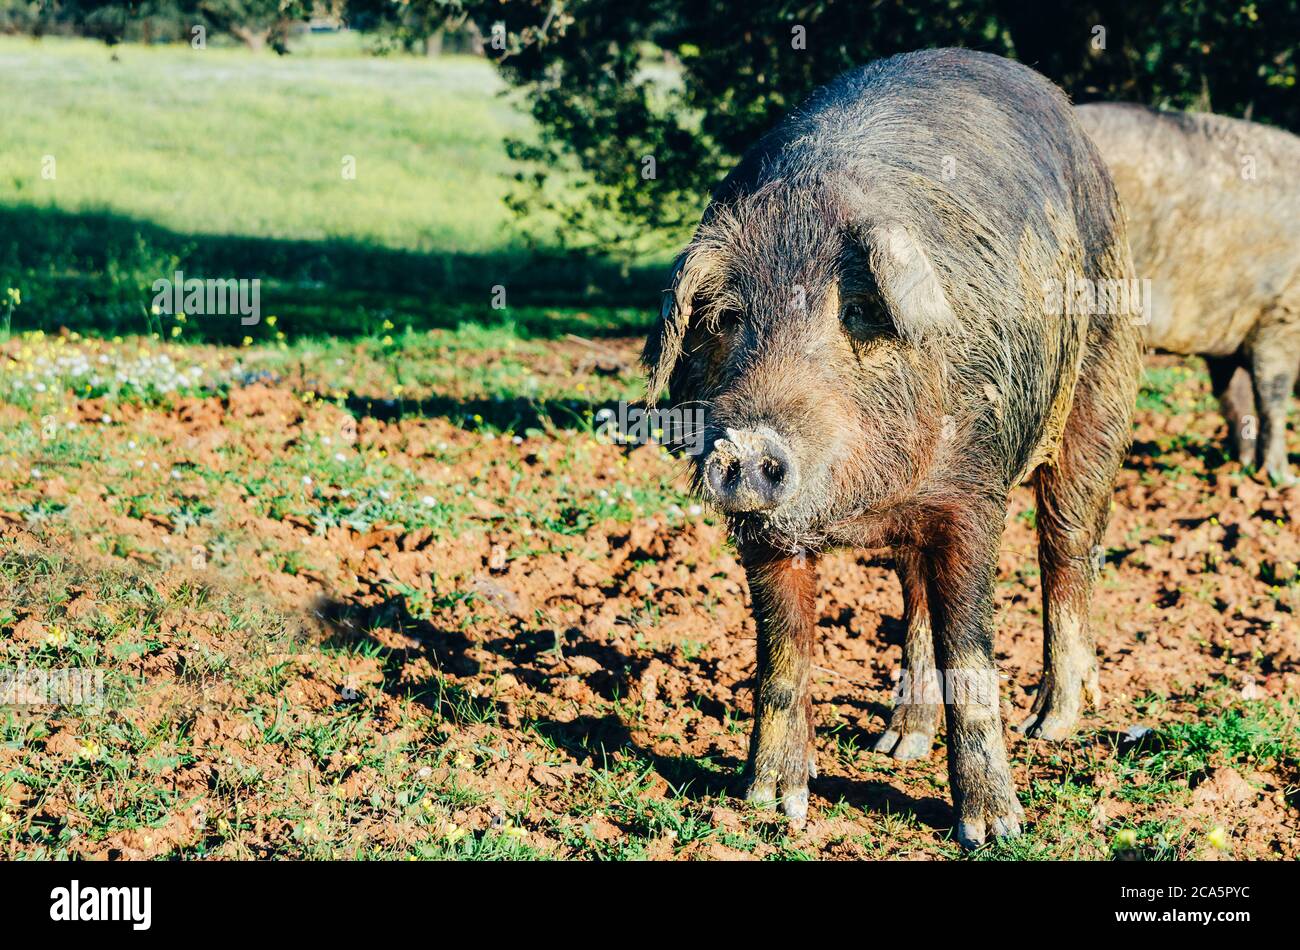 Close up portrait of iberican pig Stock Photo